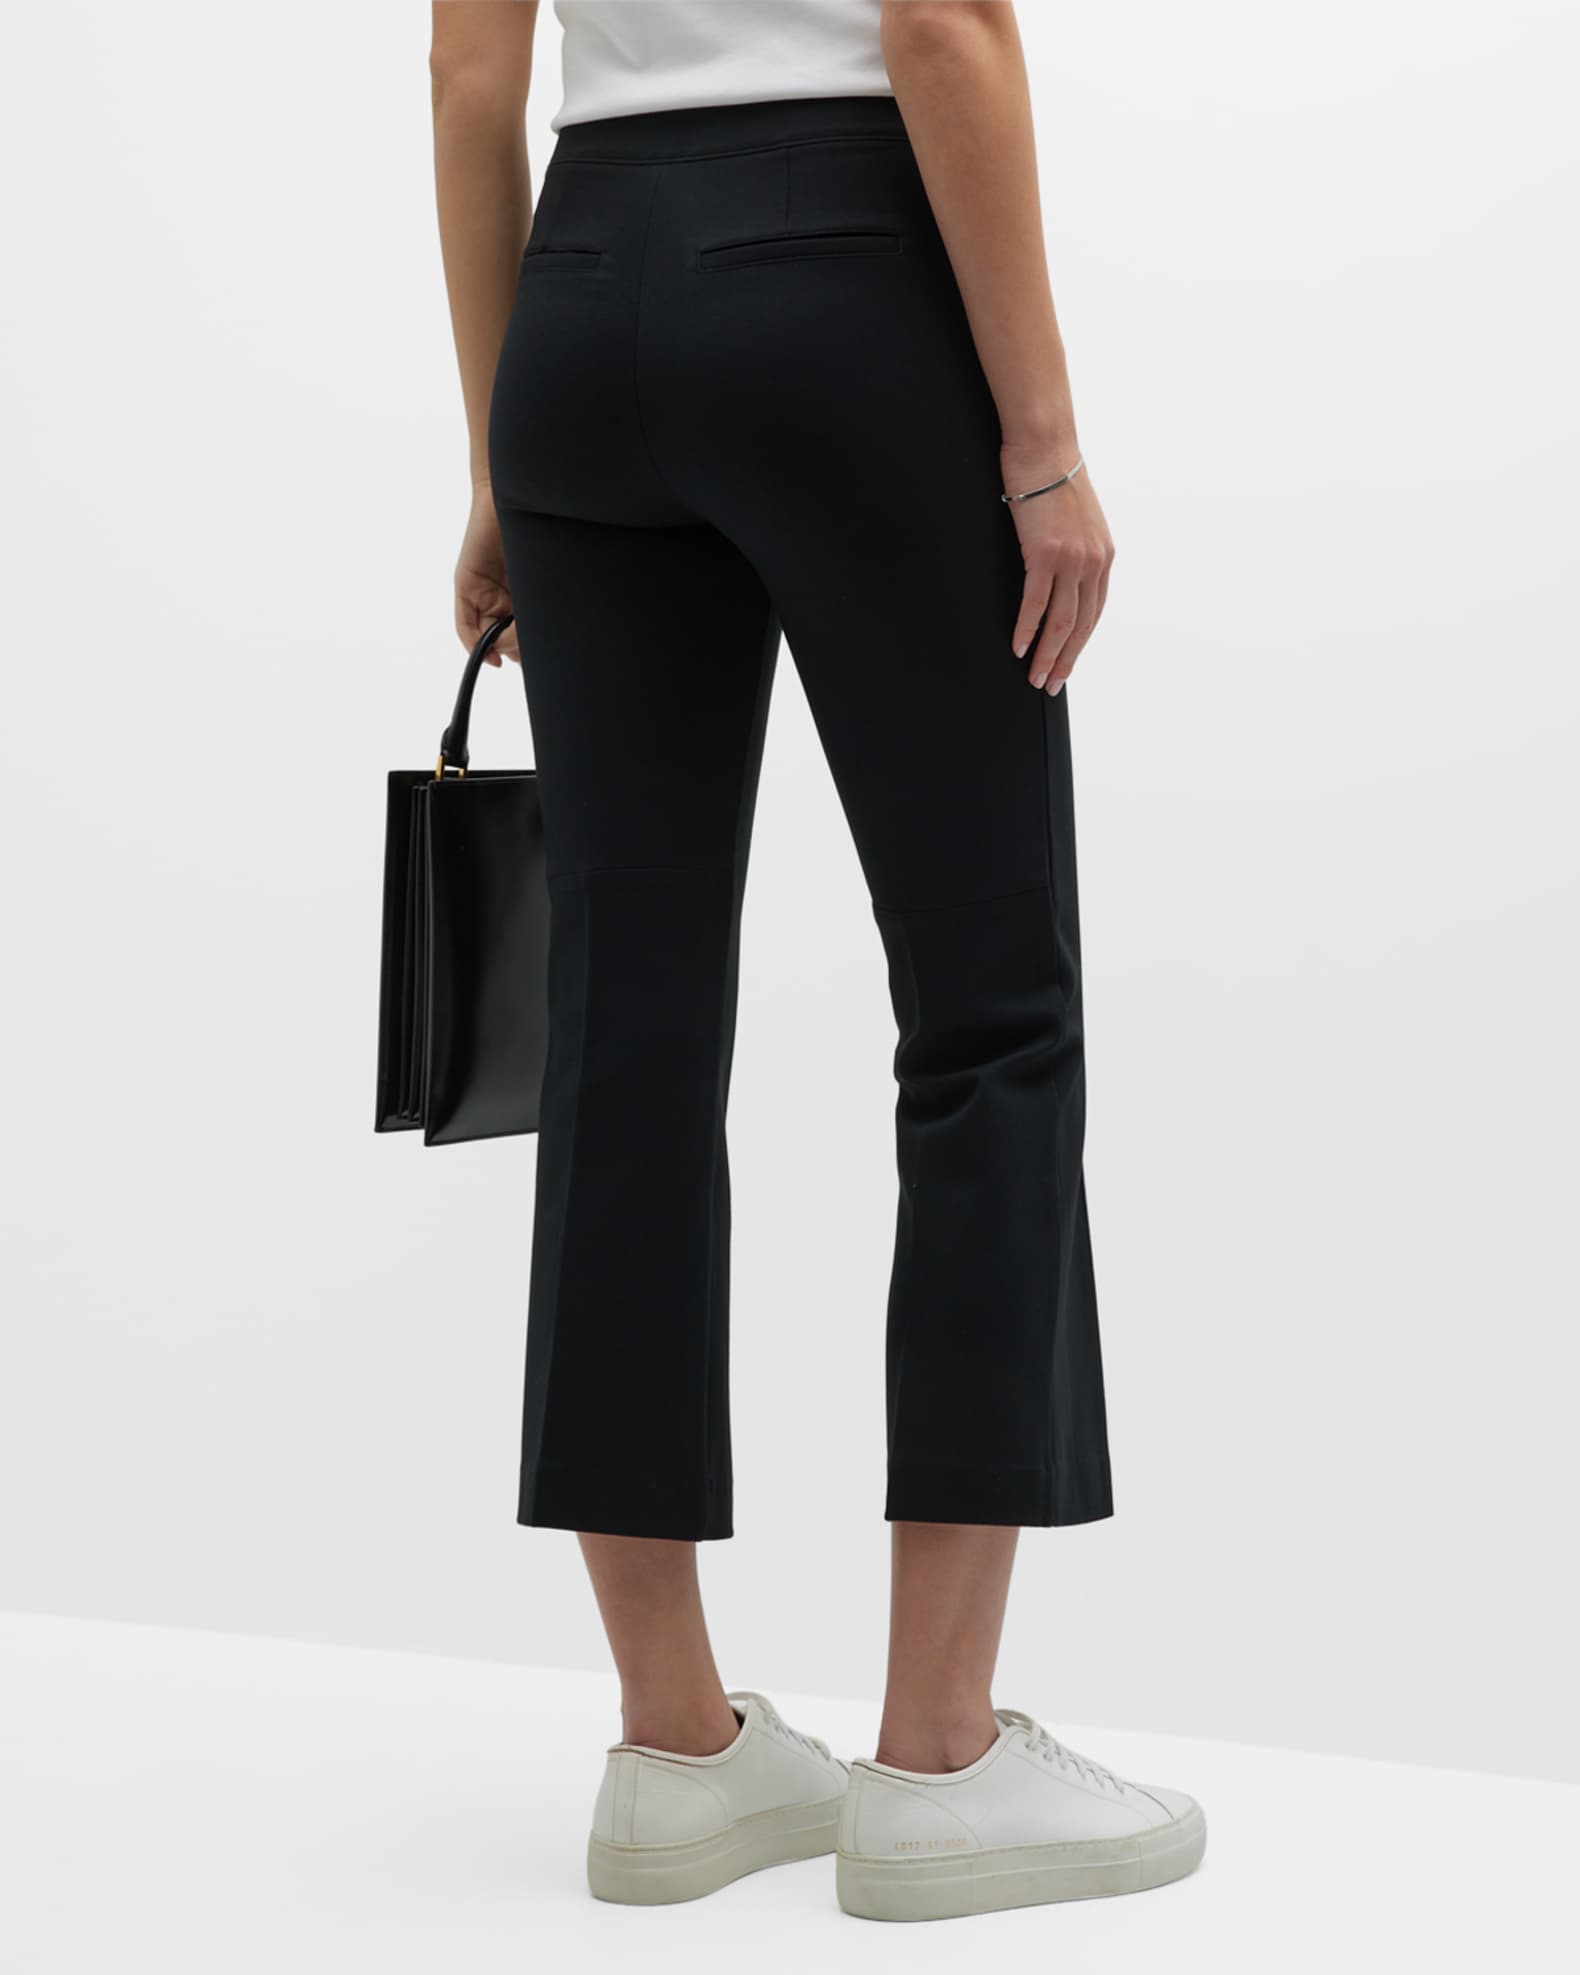 OfficeOOTD in our NEW #Spanx perfect pant kick flare in Dijon Houndst